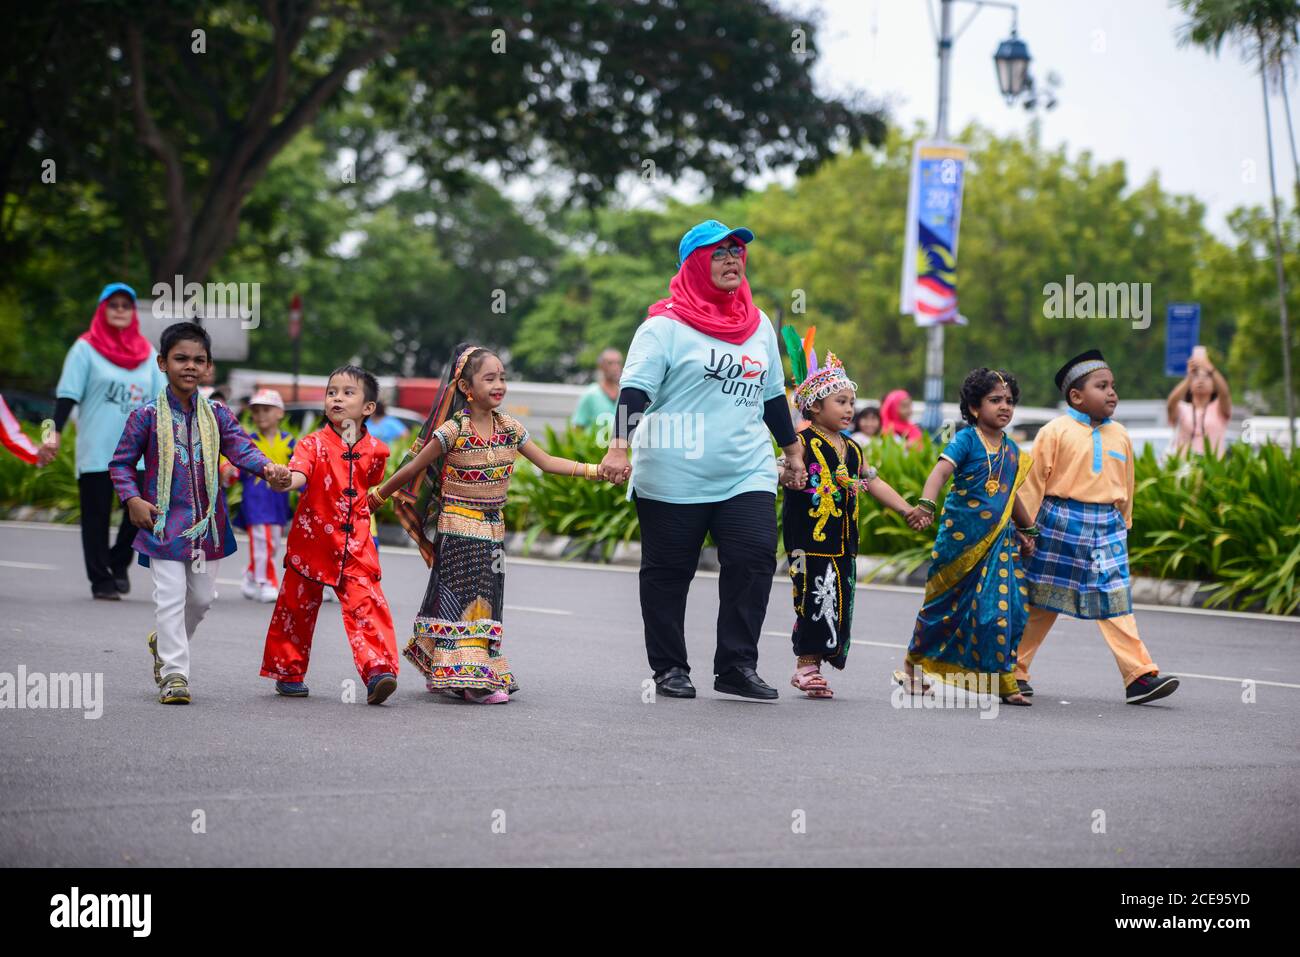 Georgetown, Penang/Malaysia - Aug 31 2016: Children from different races walk to together during independence parade. Stock Photo